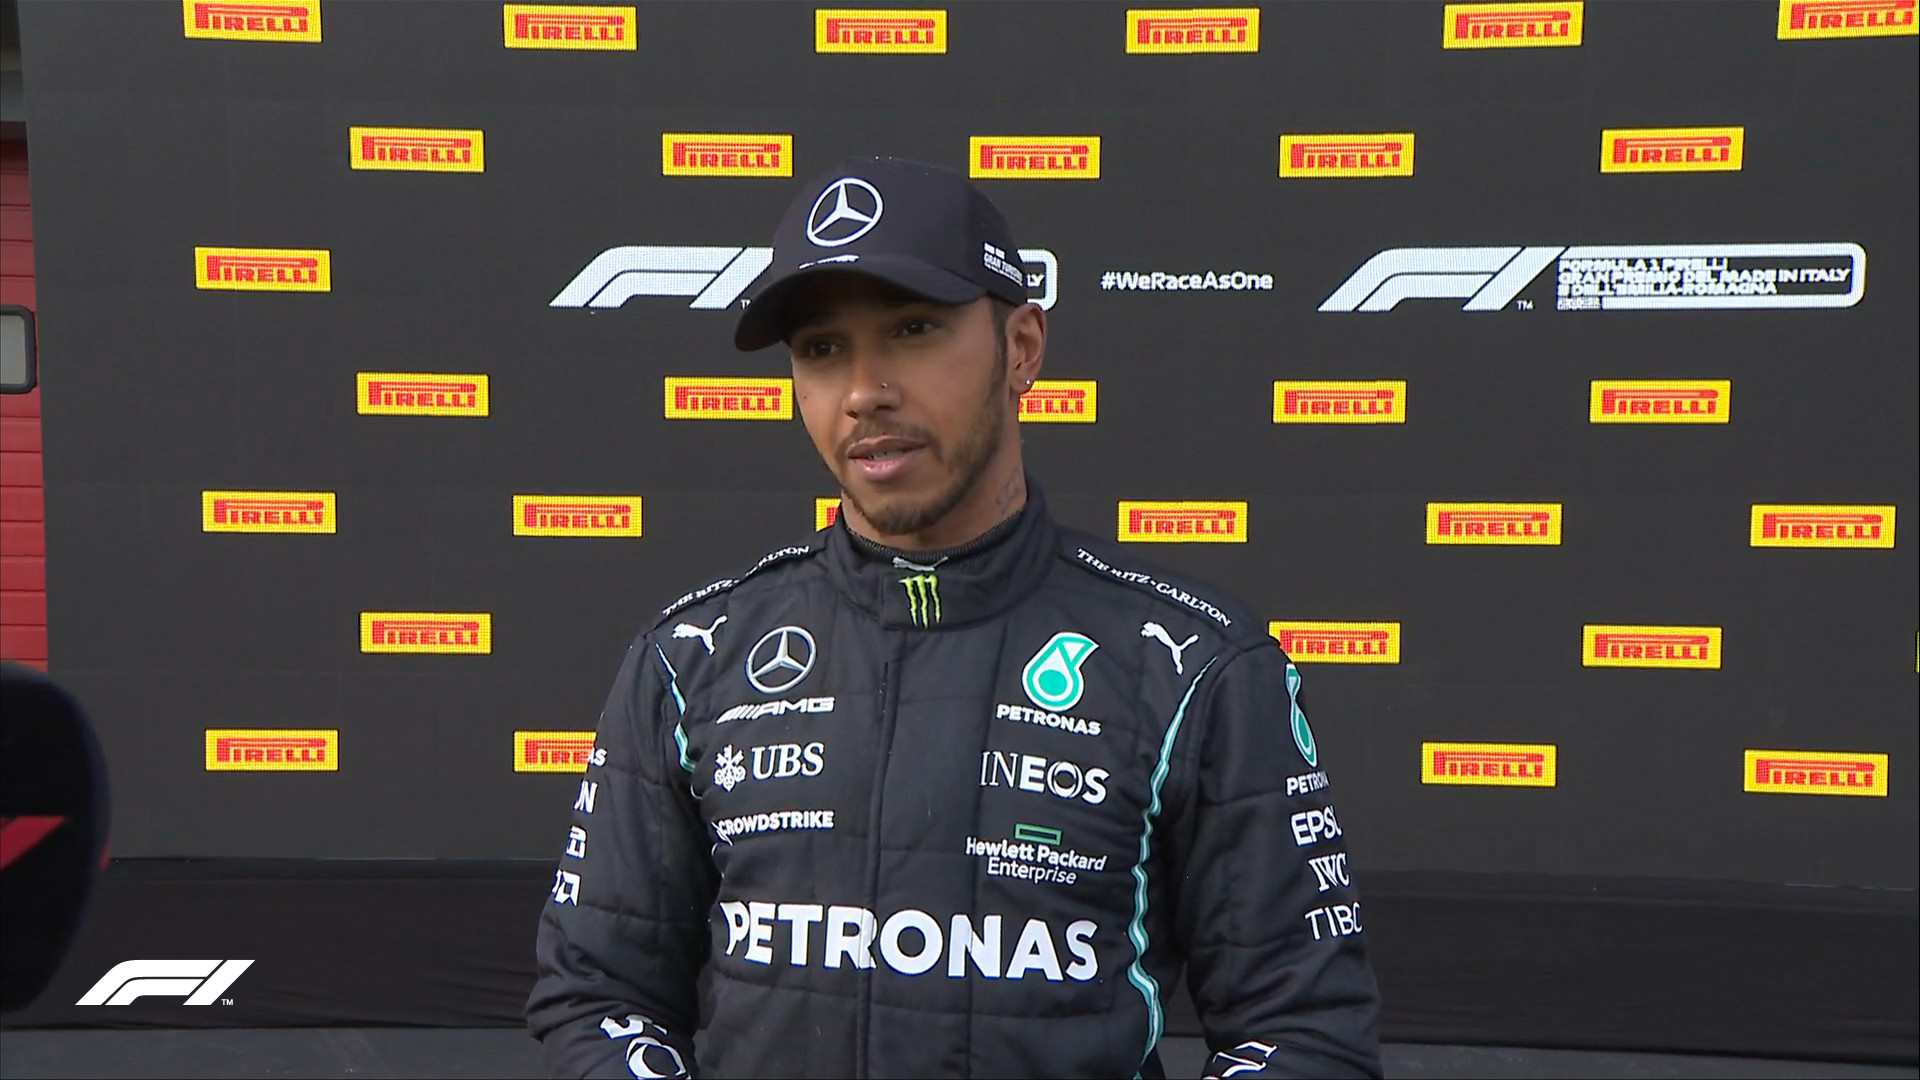 Lewis Hamilton in a file photo. (Image credit: Twitter/ F1)